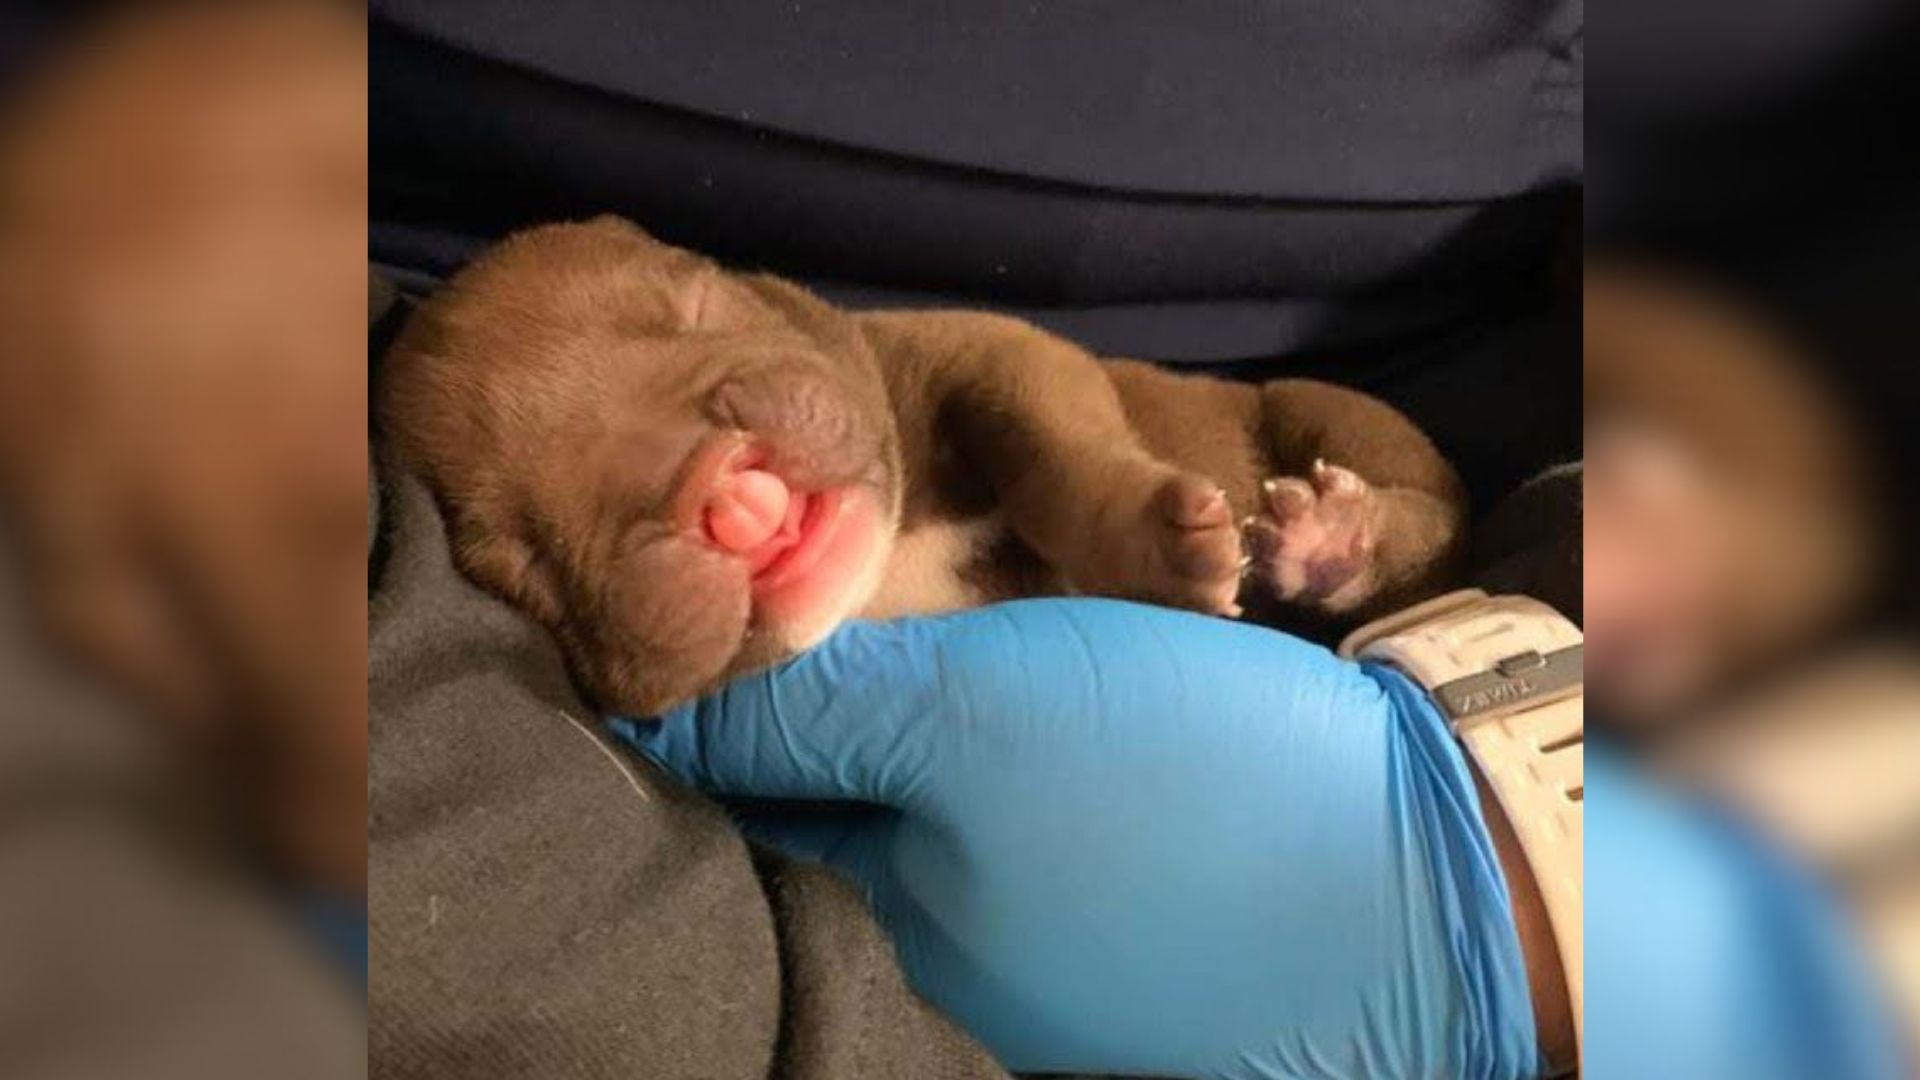 Owner Abandons Newborn Puppy On The Street Because She Was Born With A Cleft Lip